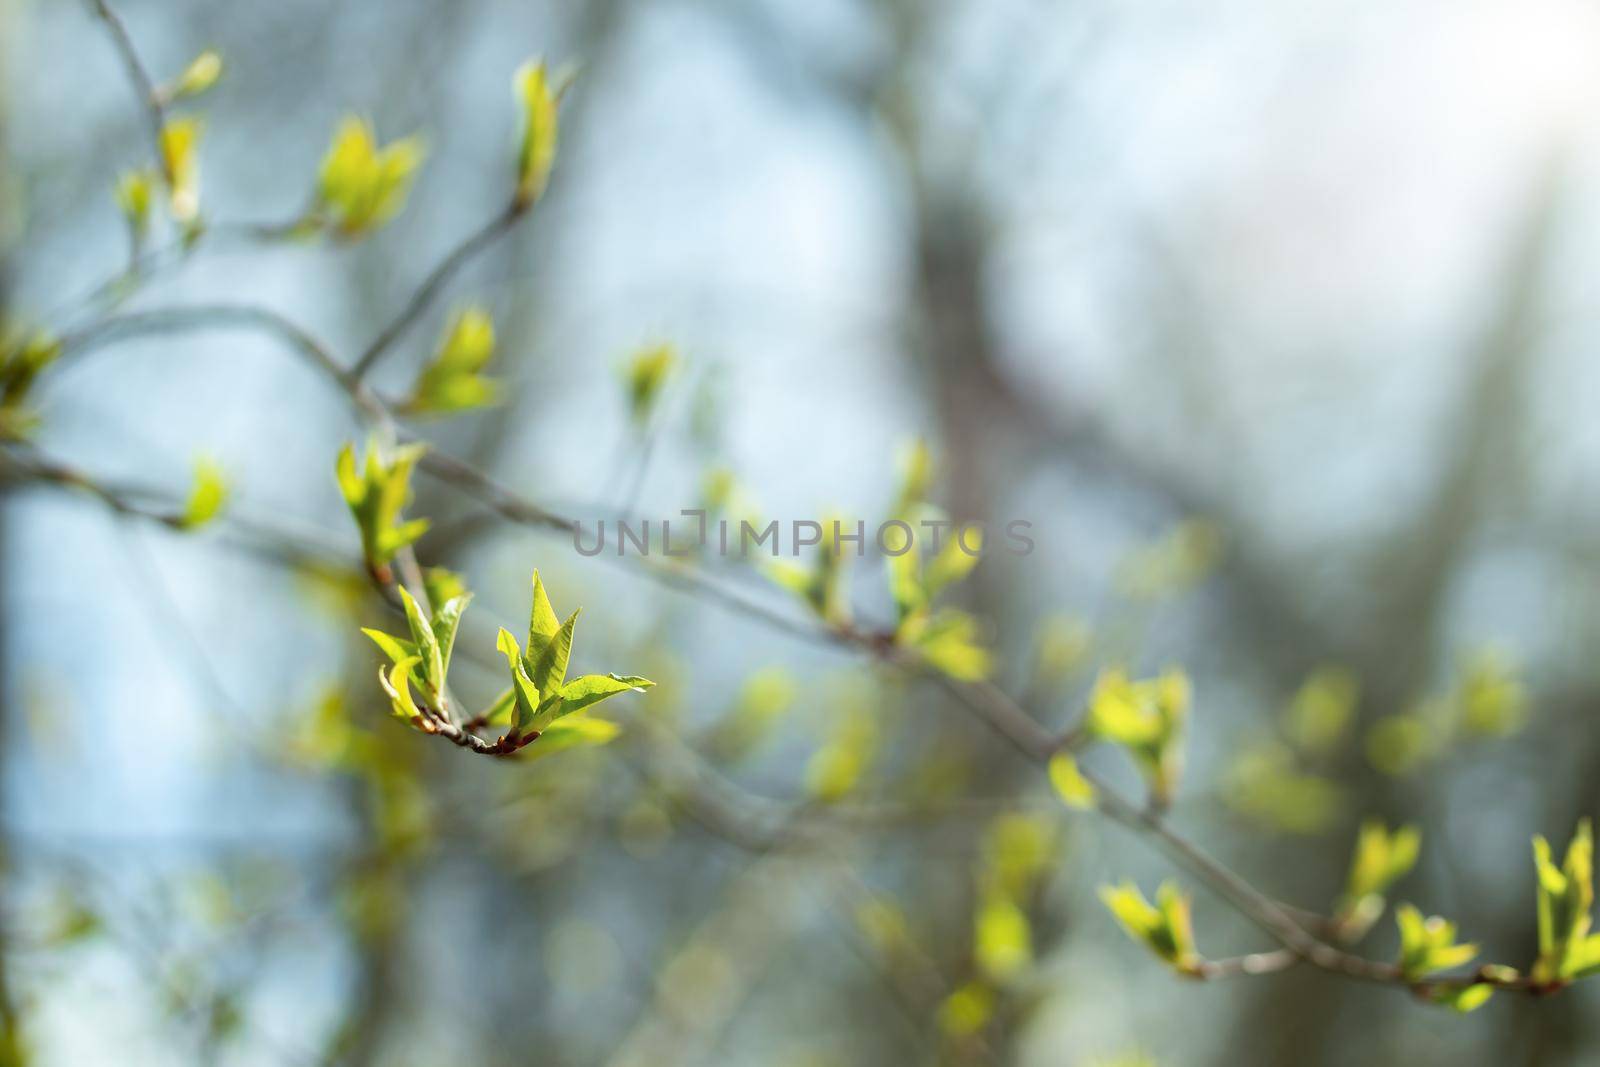 New leaves bloom from their buds on the branches of the tree. Beautiful spring background by galsand